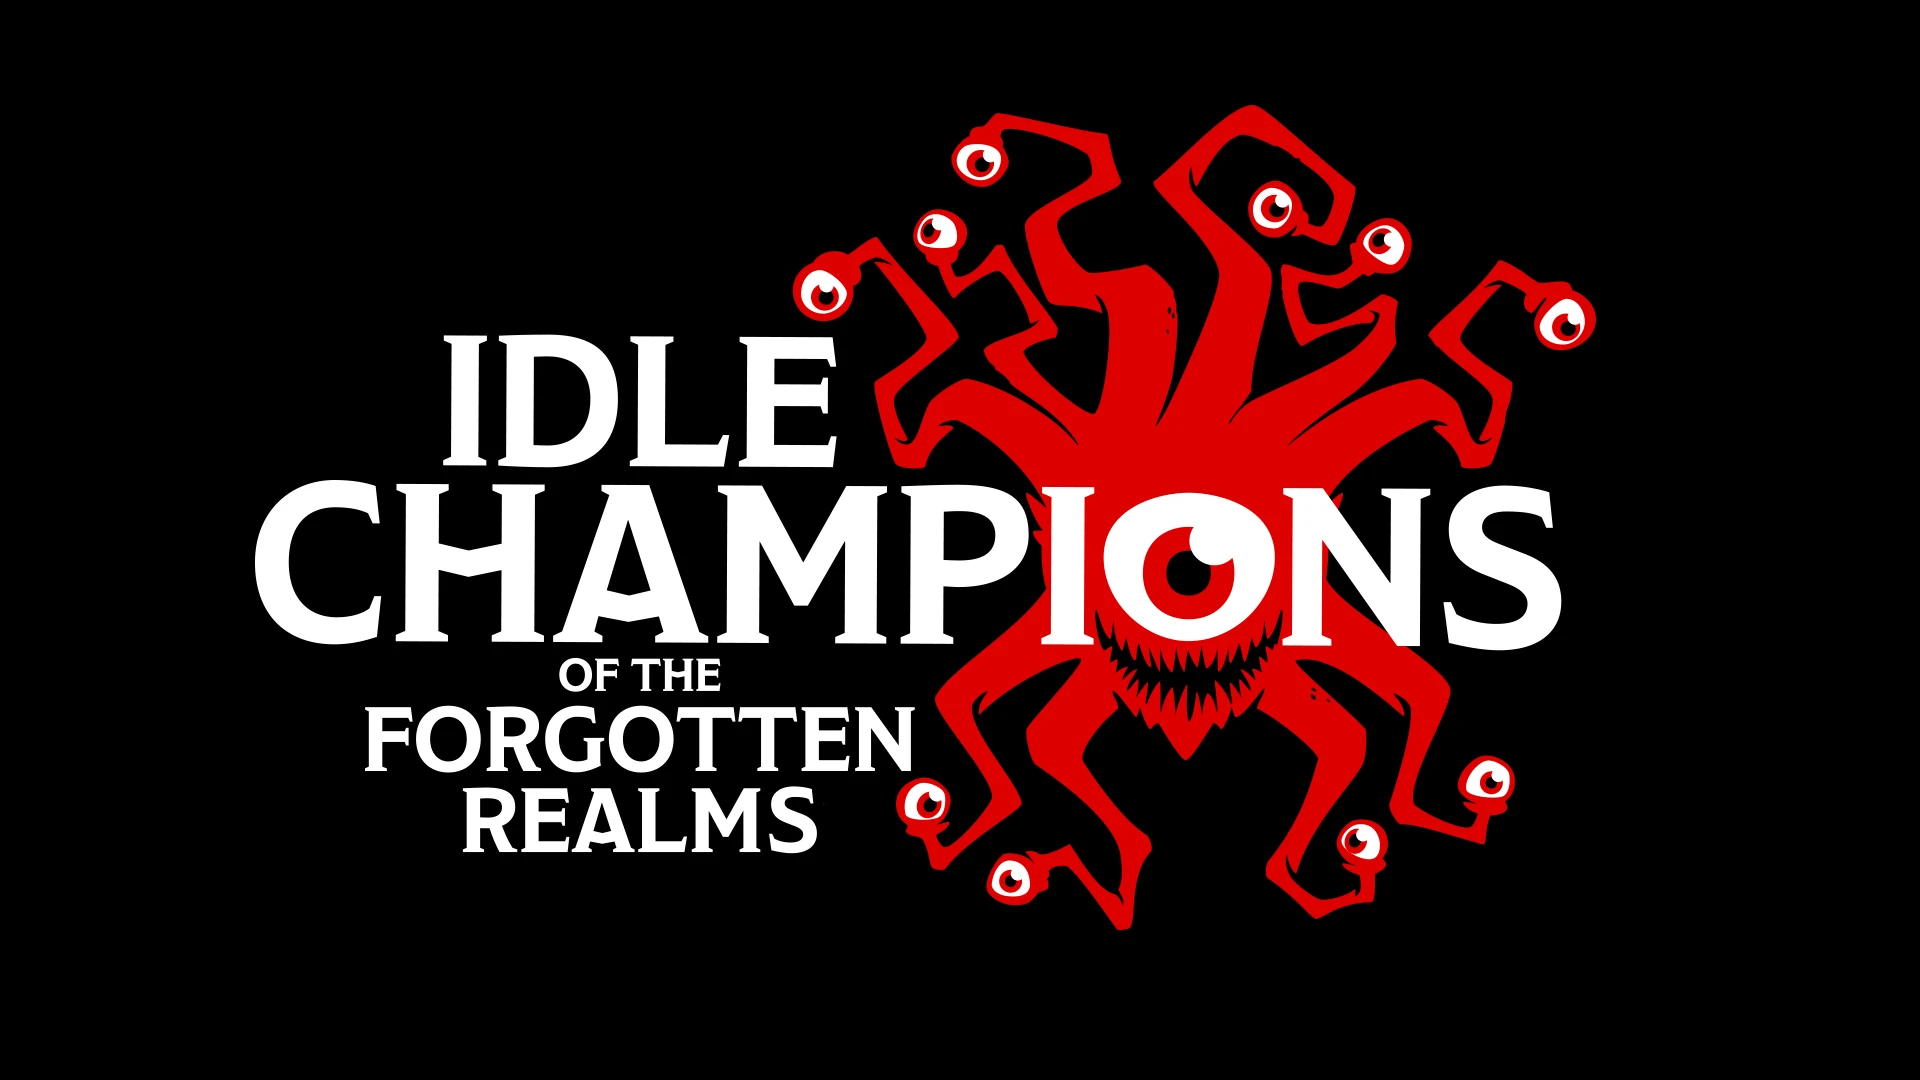 Sponsored by Idle Champions of the Forgotten Realm